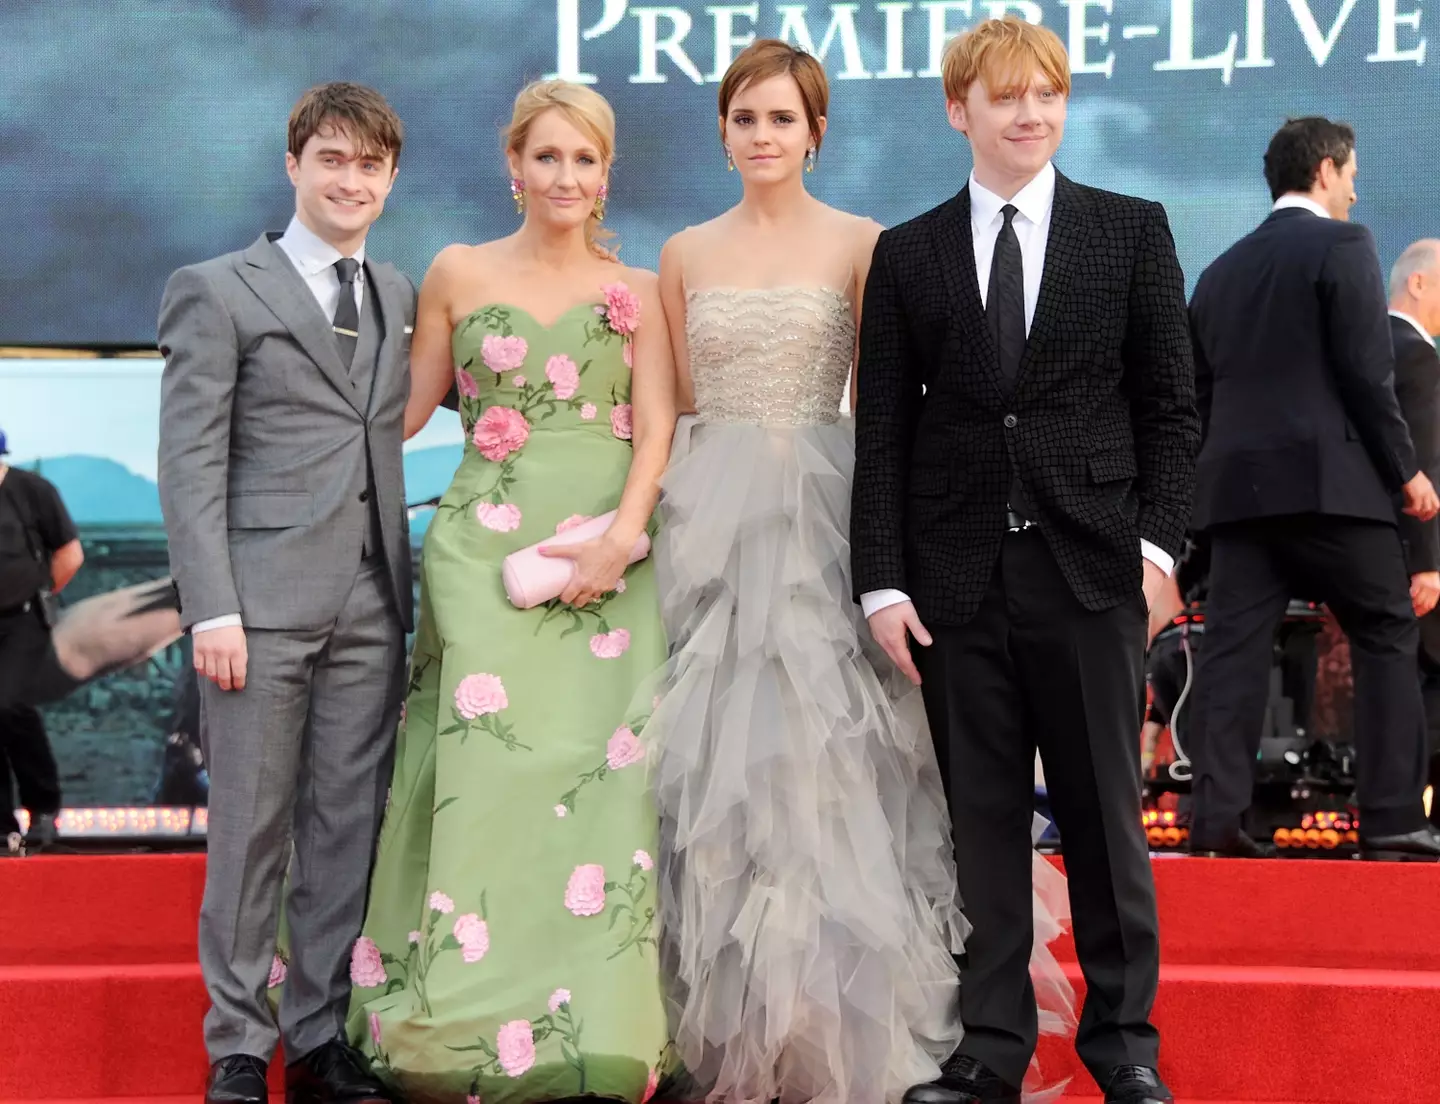 Radcliffe said the whole saga 'made him really sad'. (Dave M. Benett/Getty Images)